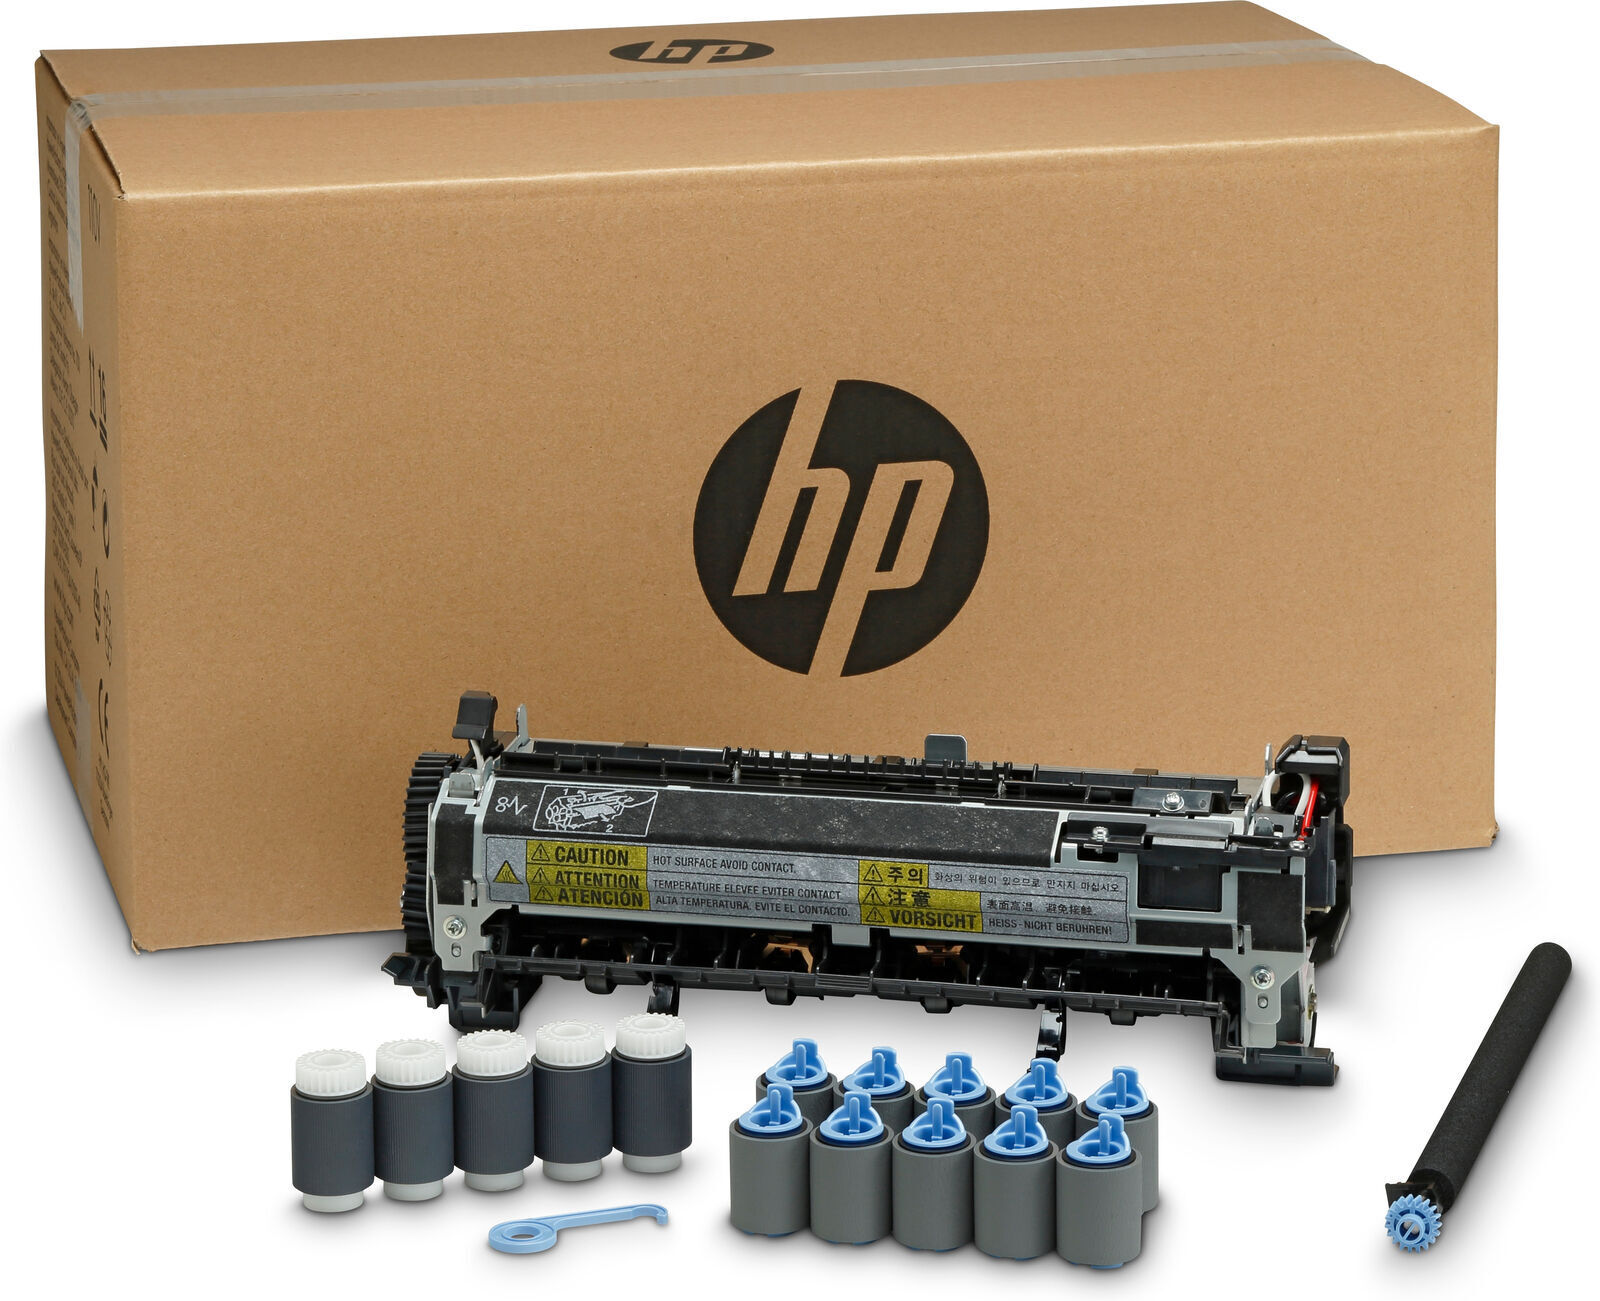 Replacement for HP LaserJet M604/M605/M606 Maintenance Kit Exchange F2G76A, F2G7